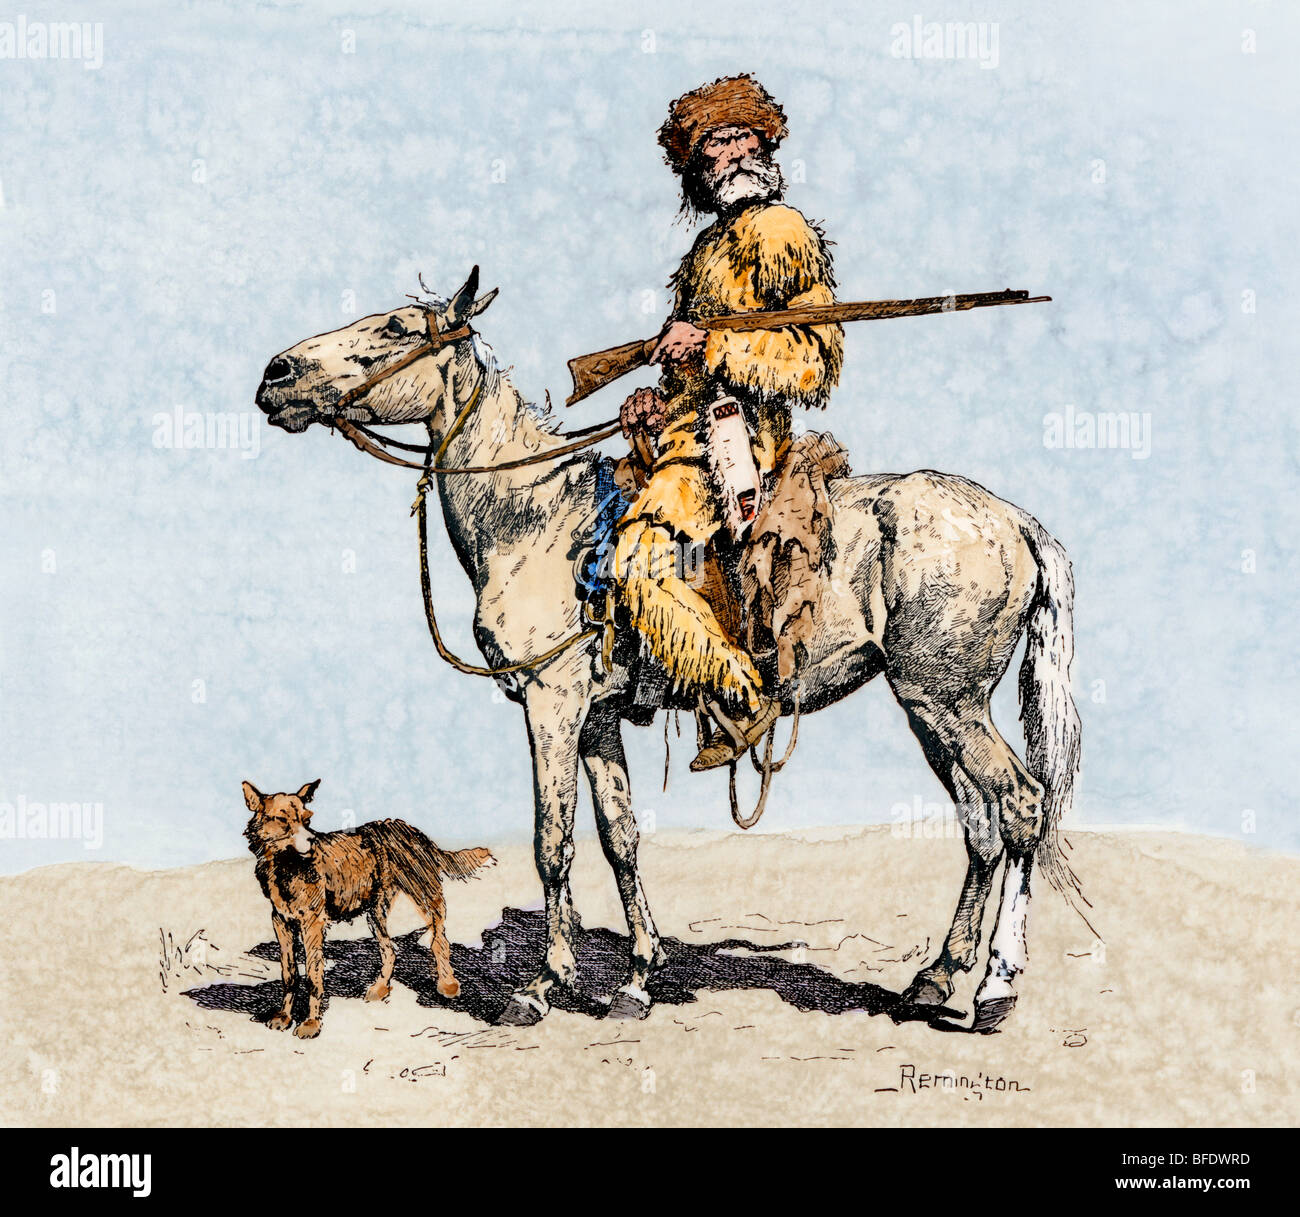 Old trapper in the American West, 1800s. Hand-colored woodcut of a Frederic Remington illustration Stock Photo